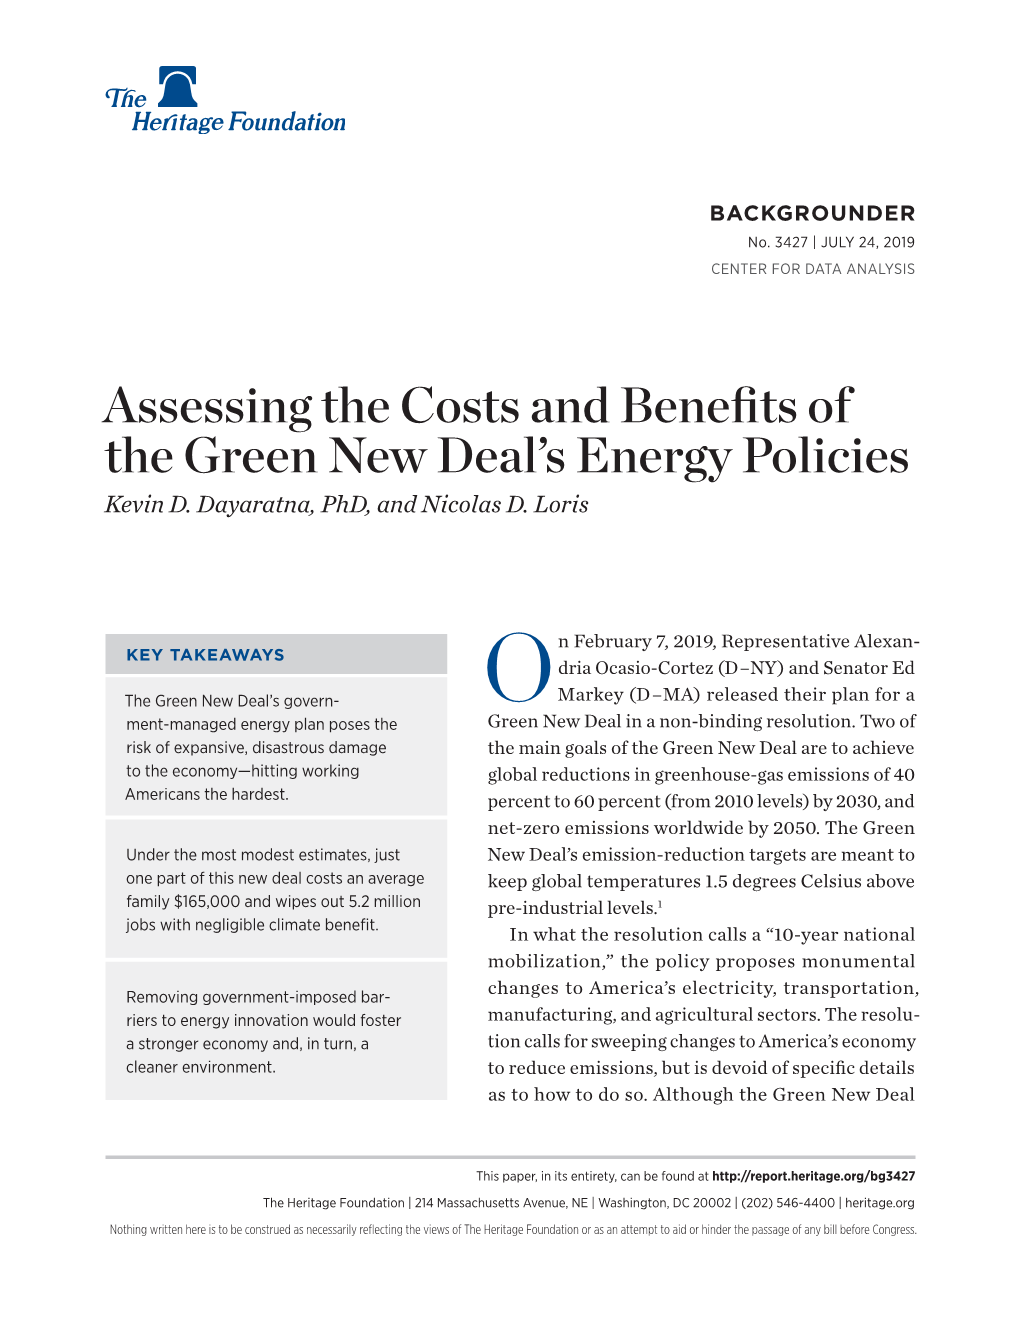 Assessing the Costs and Benefits of the Green New Deal's Energy Policies